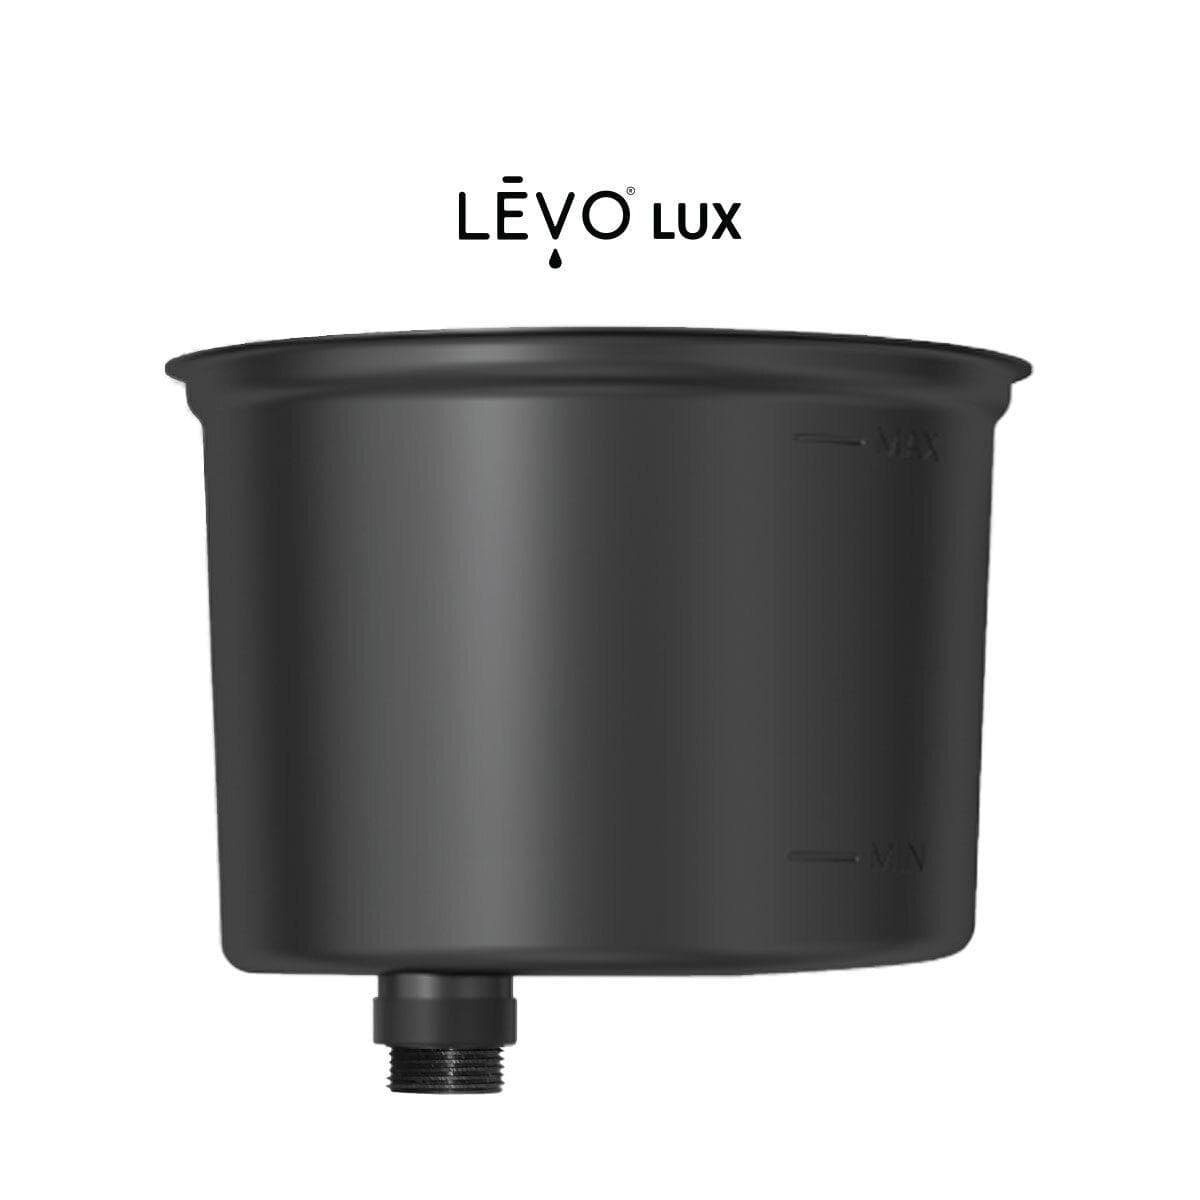 LEVO Lux reservoir basin spare part with ceramic coating